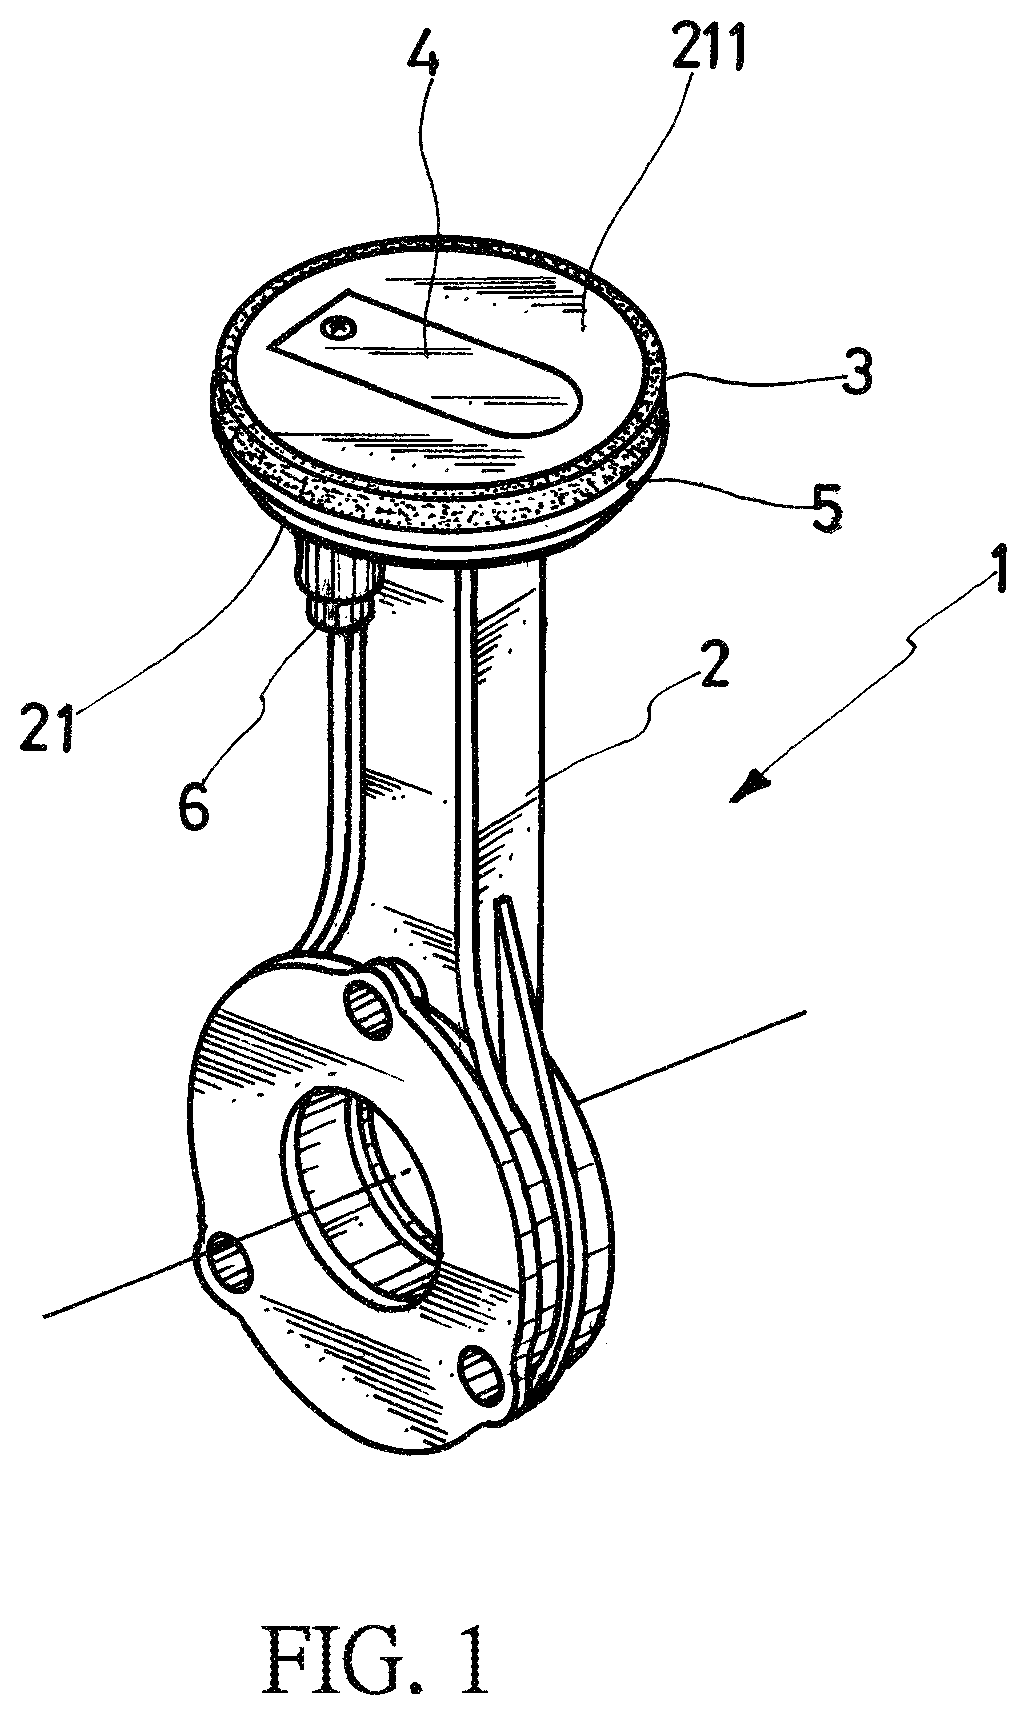 Wear-preventive air-charger piston structure